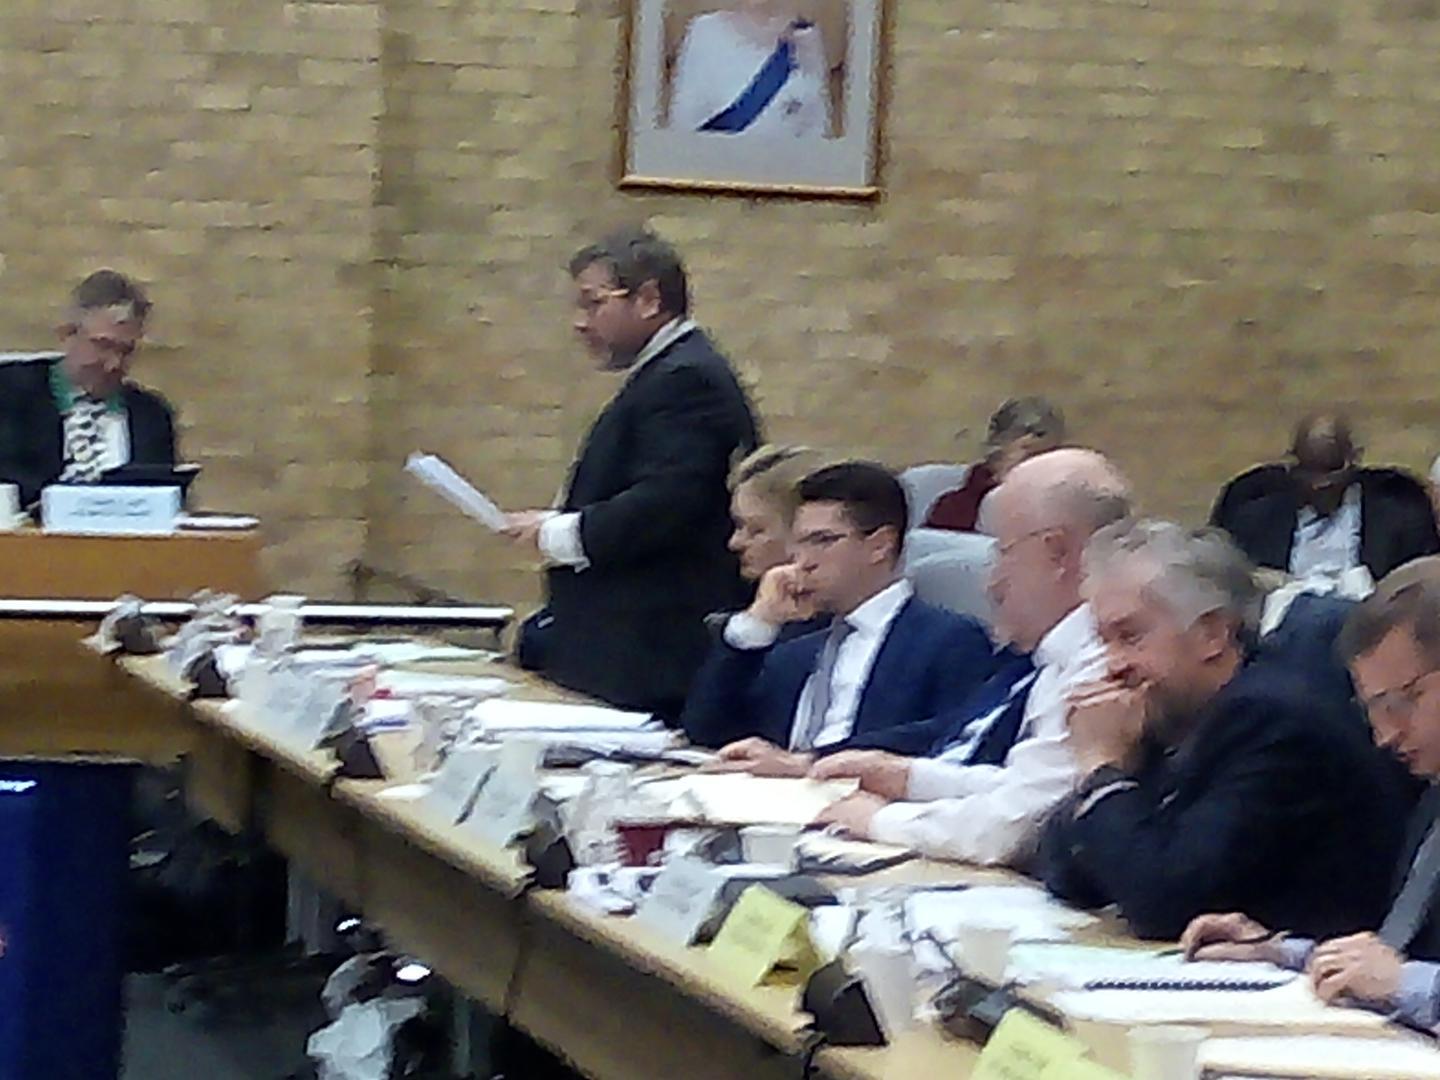 Cllr Peter Geary (Cons, Olney) criticised the Labour administration for cutting the Neighbourhood Employment Programme to get people into work. He was told that the council is adapting its help to deal with people who work and also live in poverty.